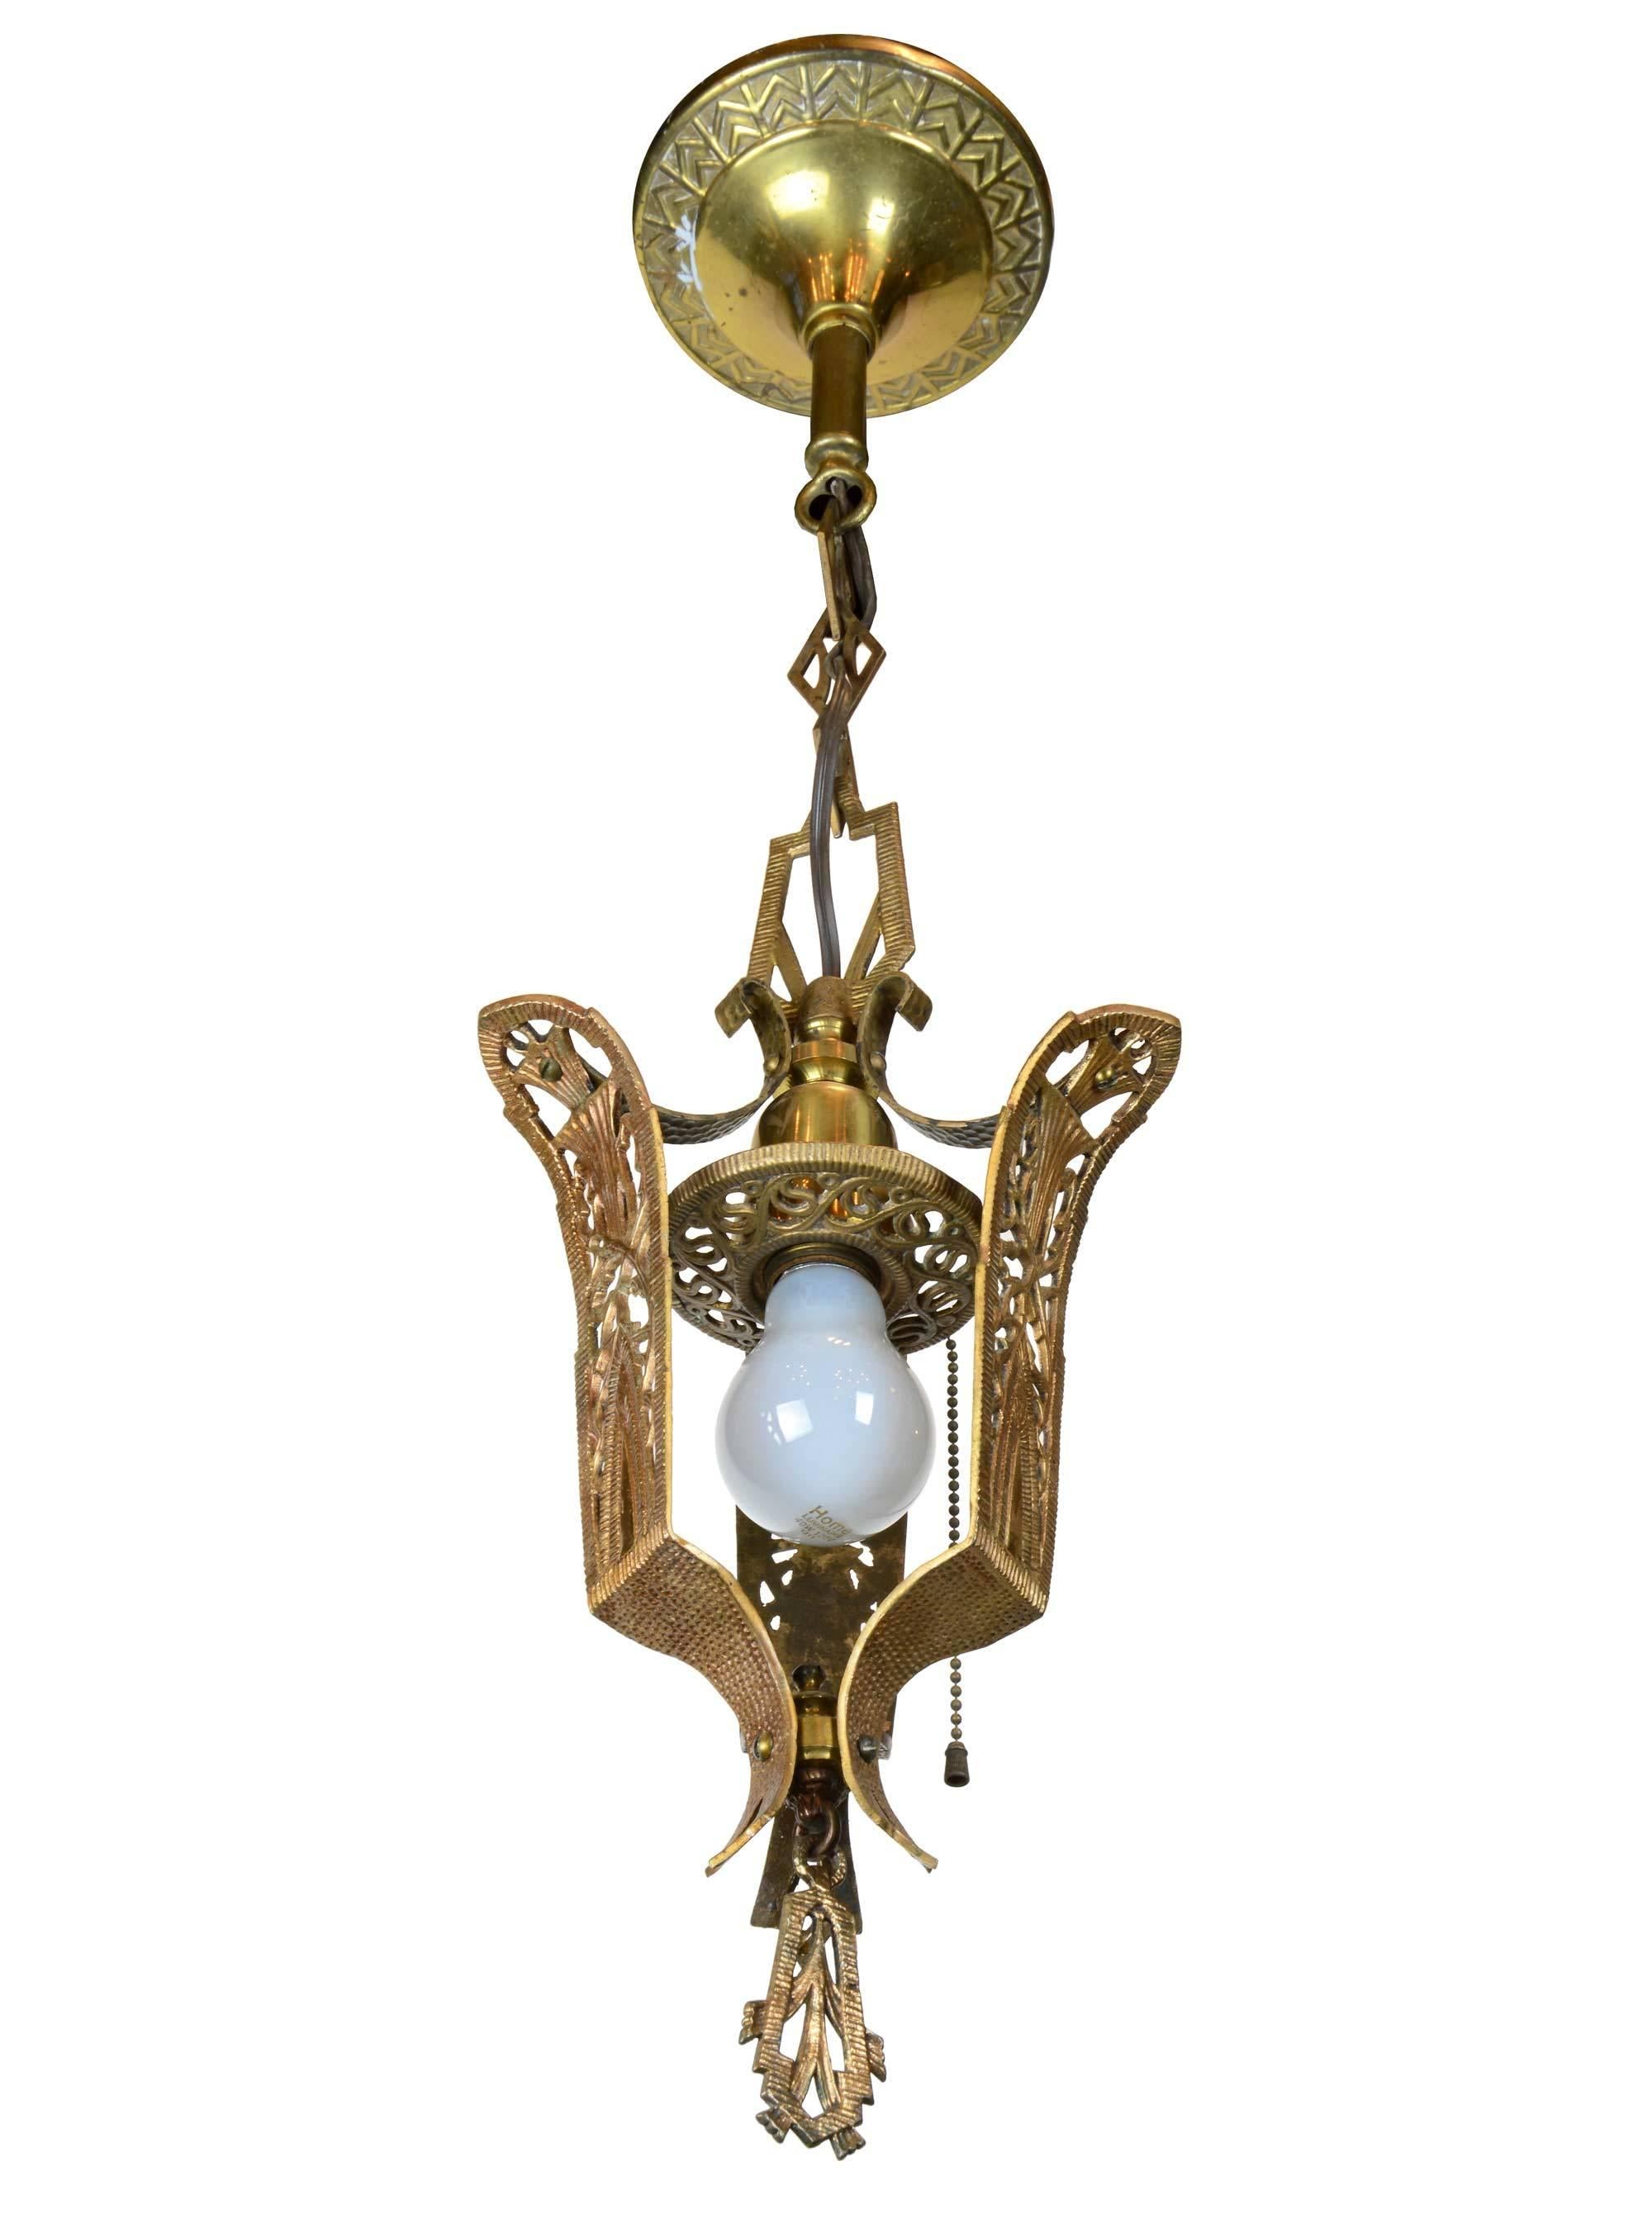 Gorgeous brass hall pendant with Art Deco detailing throughout. This fixture is sure to add a touch of elegance to any home. Pair it with the matching five light chandelier to really be transported back in time. (Search reference #46750)

We find